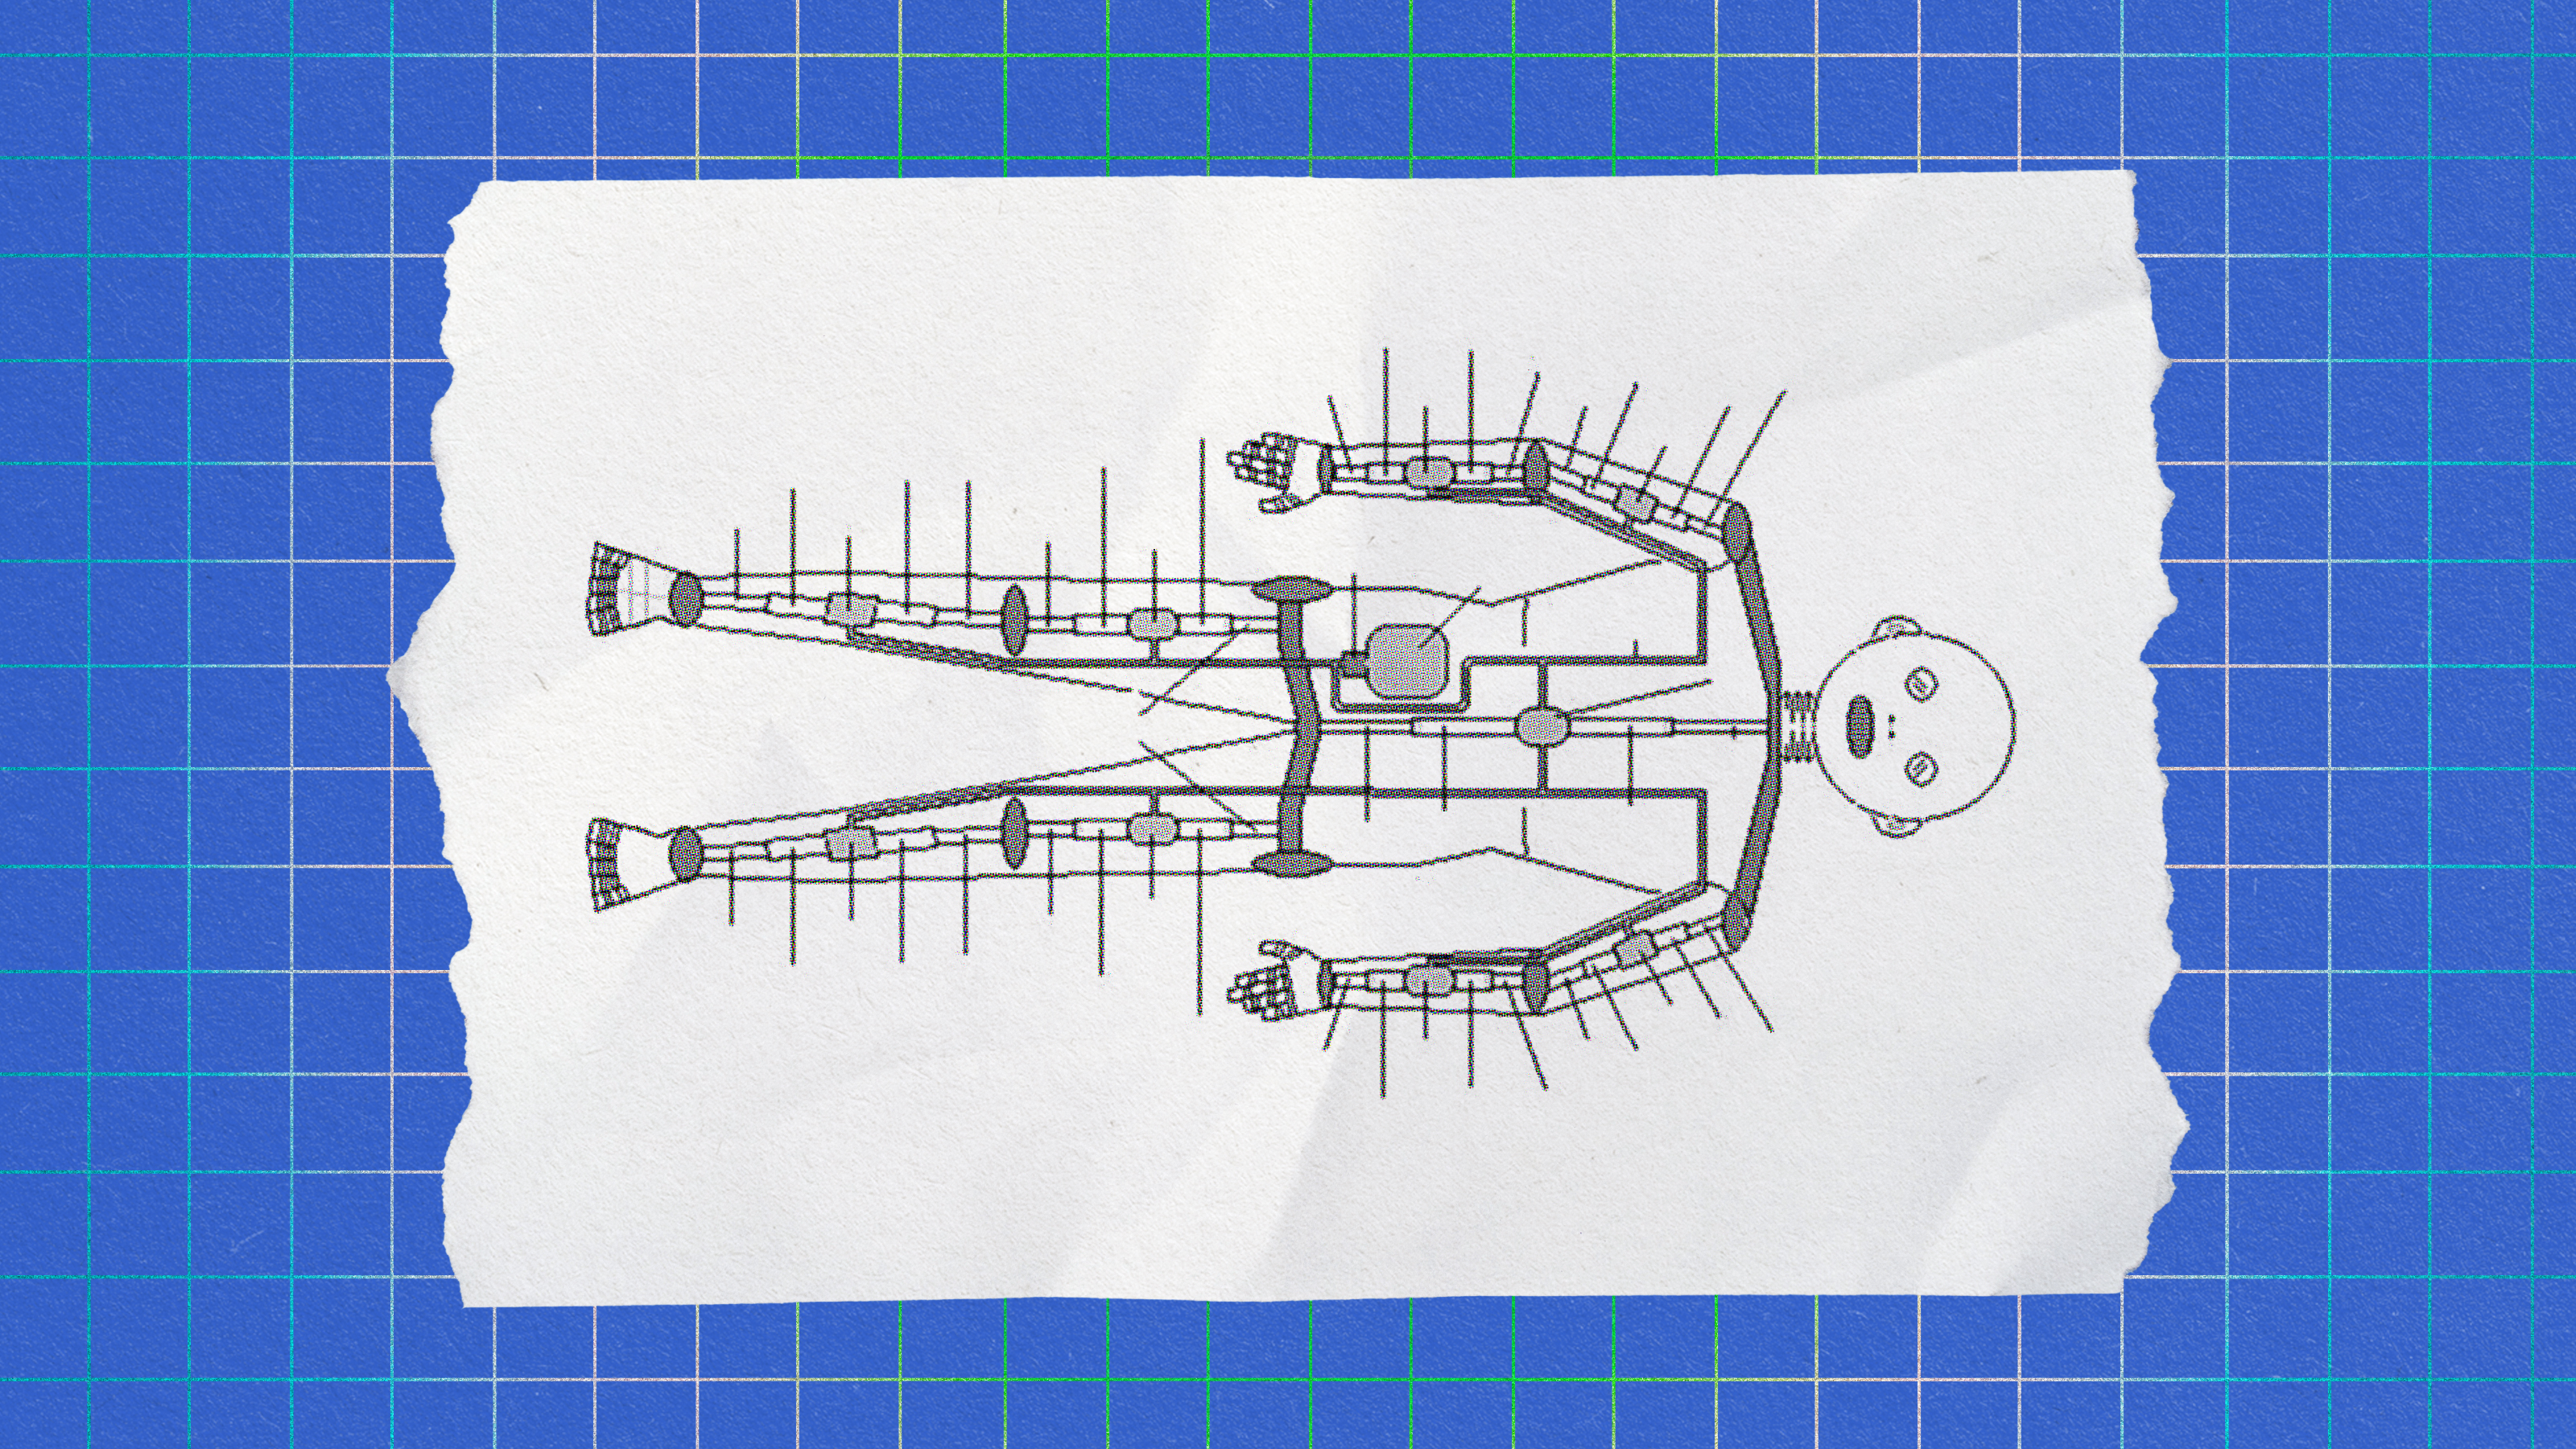 A golden age robotics-inspired drawing of a human body on paper.